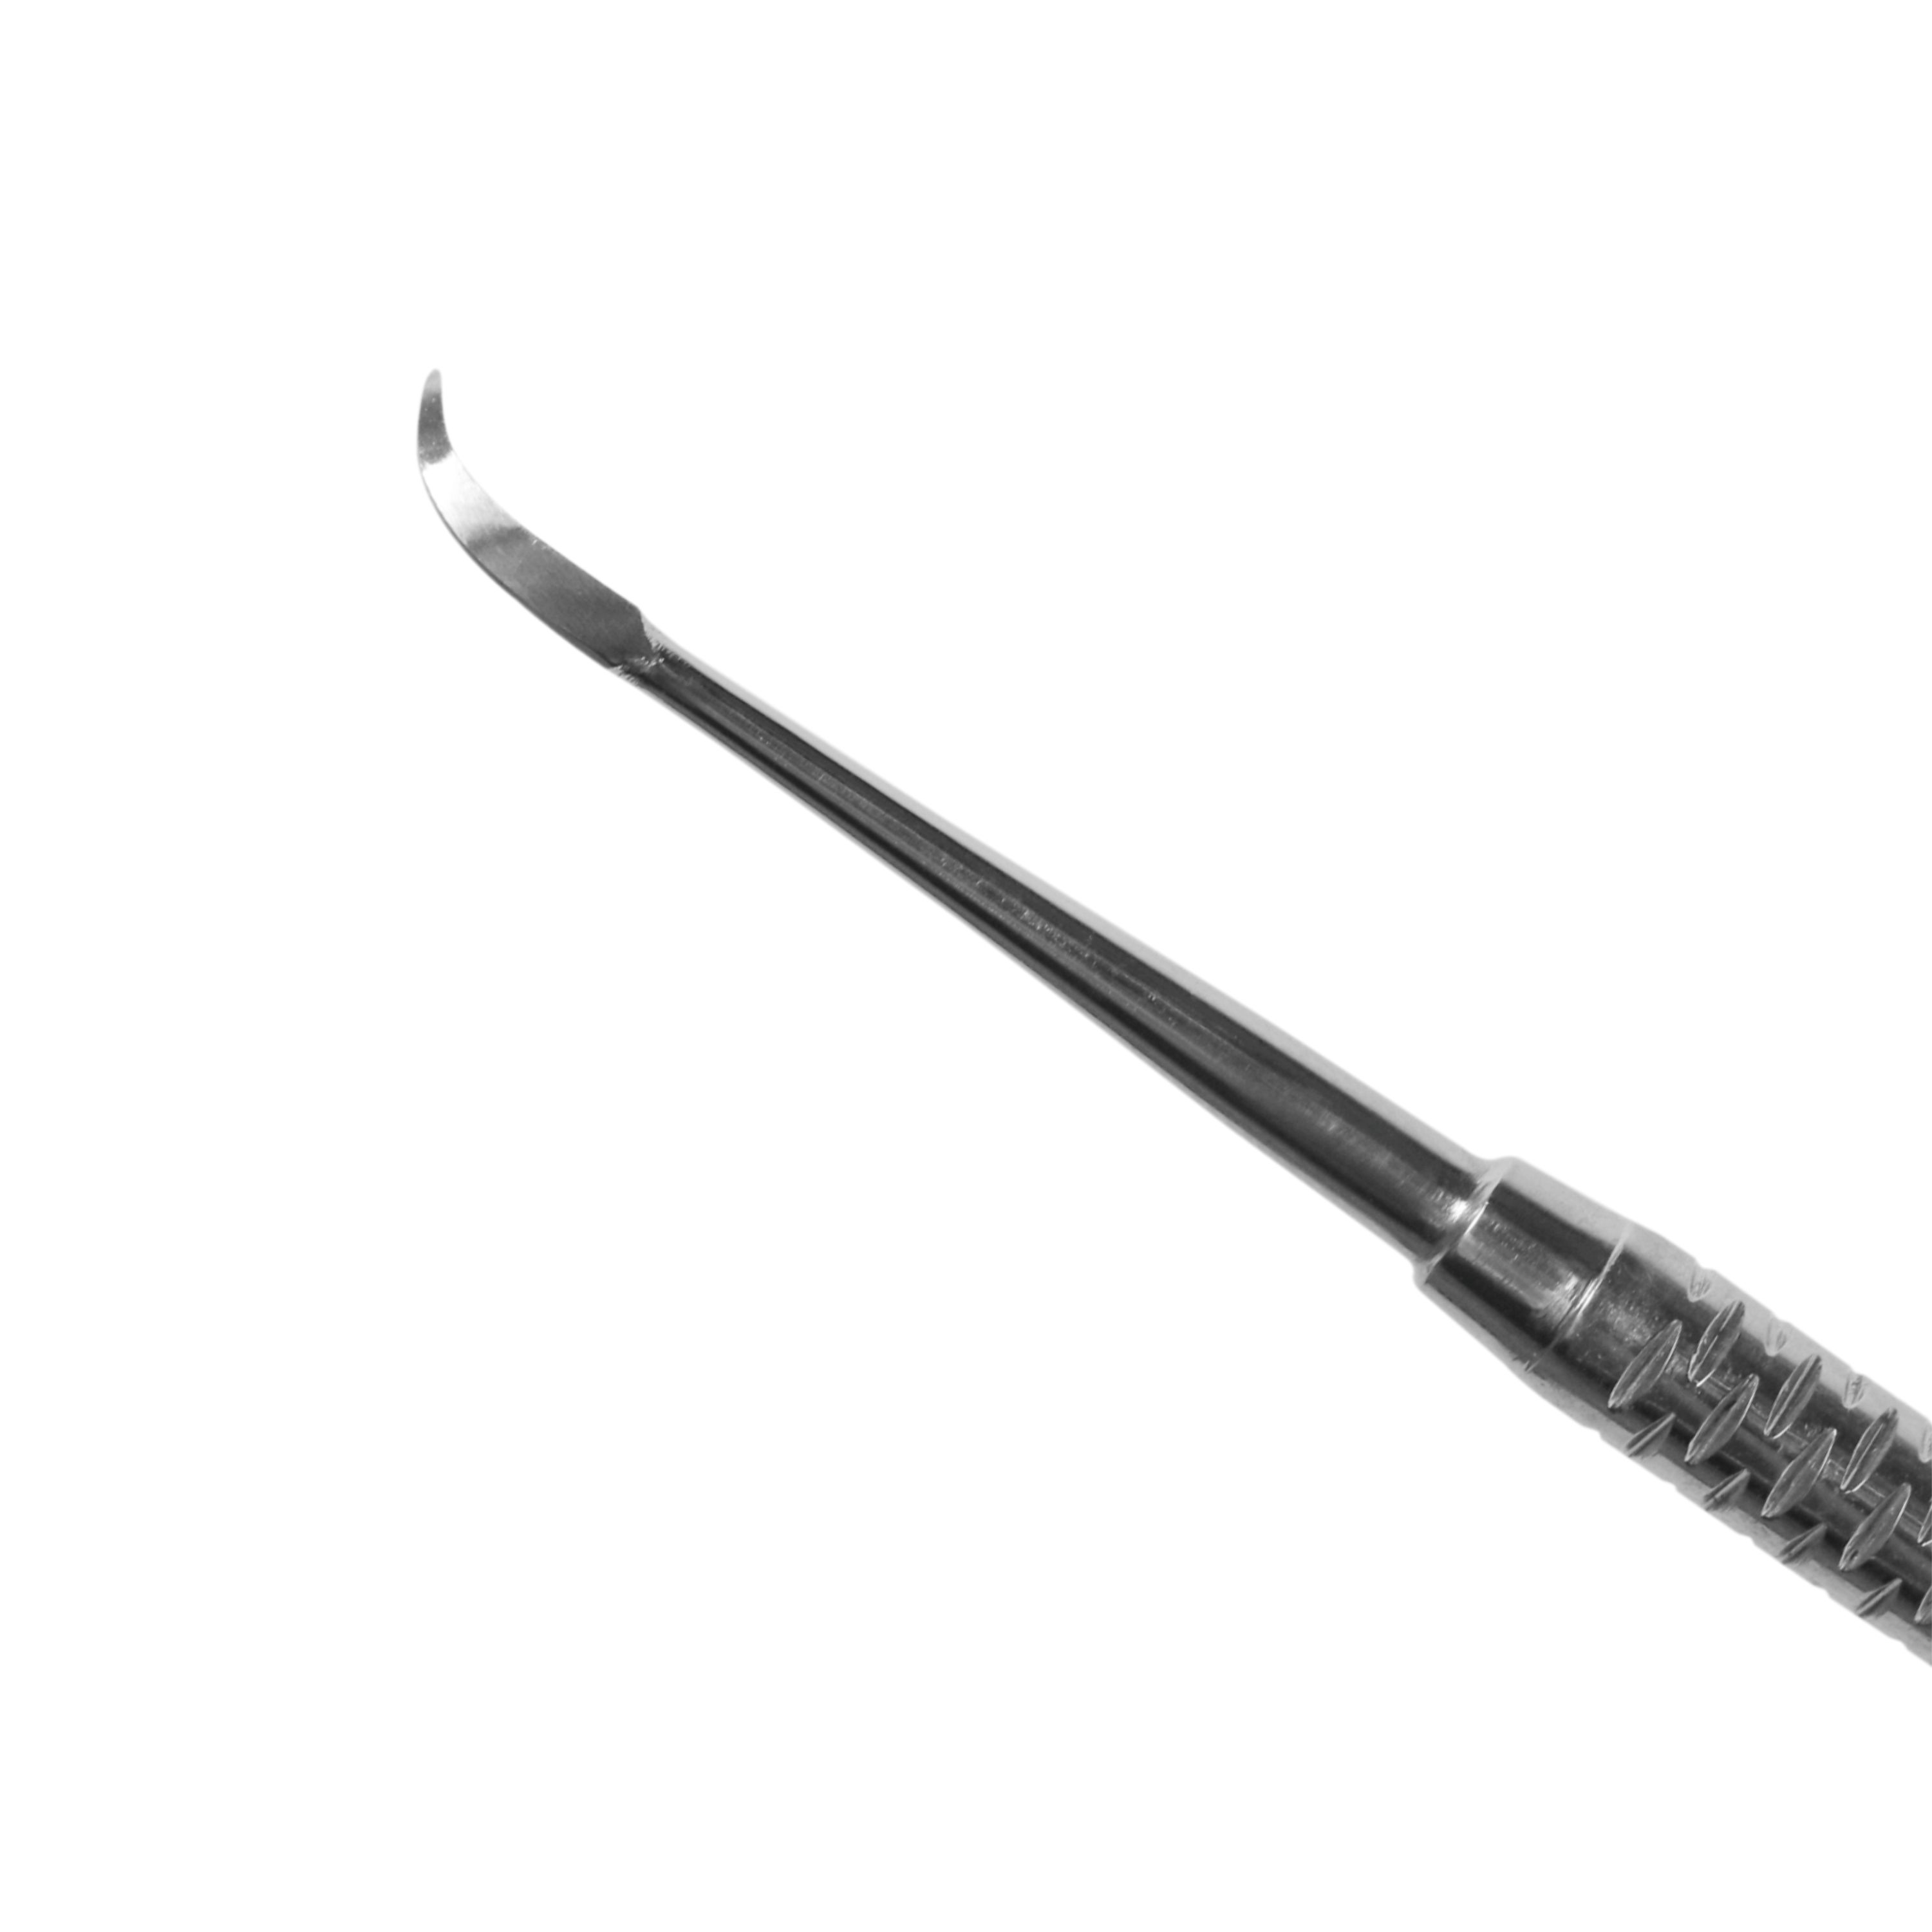 Trust & Care Ortho Utility Instrument